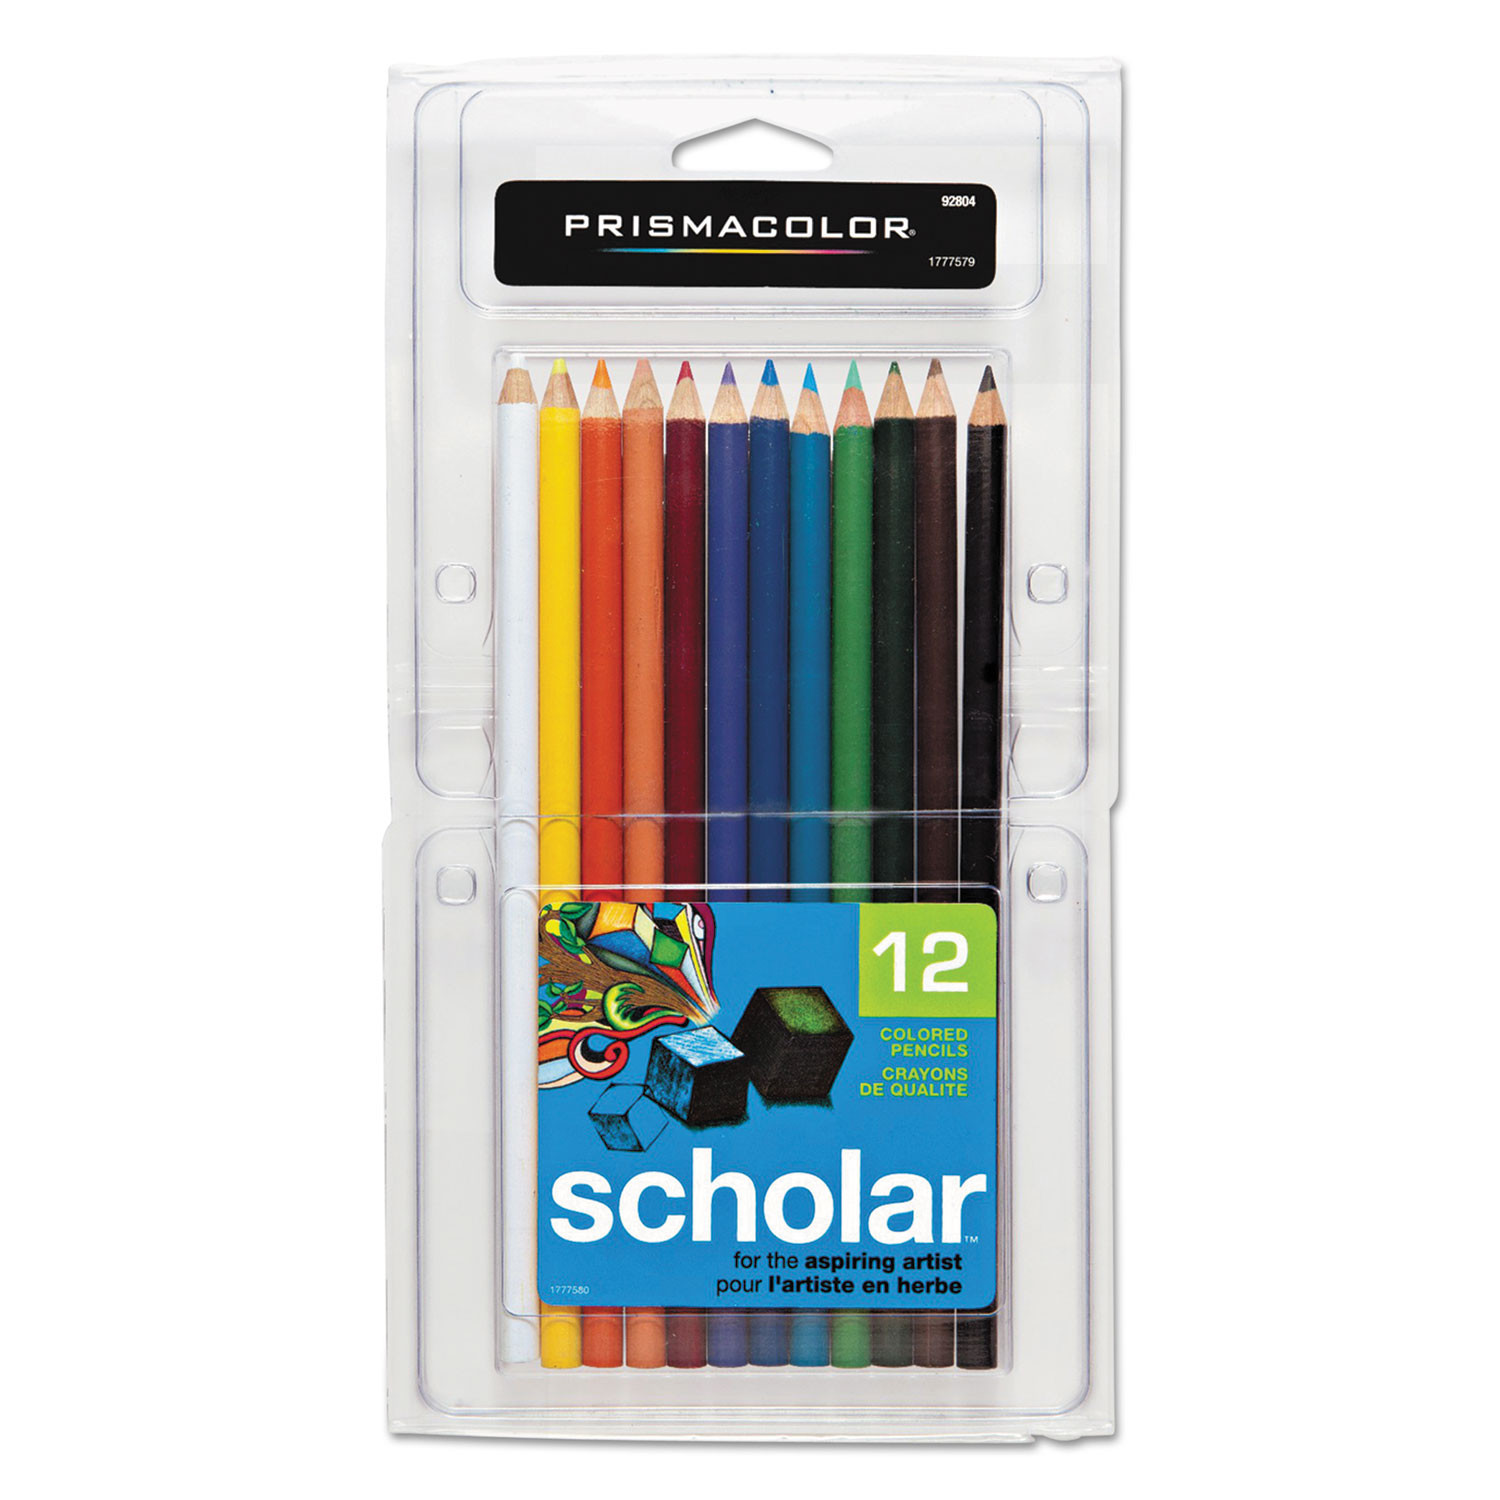  Prang Duo-Color Colored Pencil Sets, 3 Mm, Assorted Lead/barrel  Colors, 6/pack : Office Products